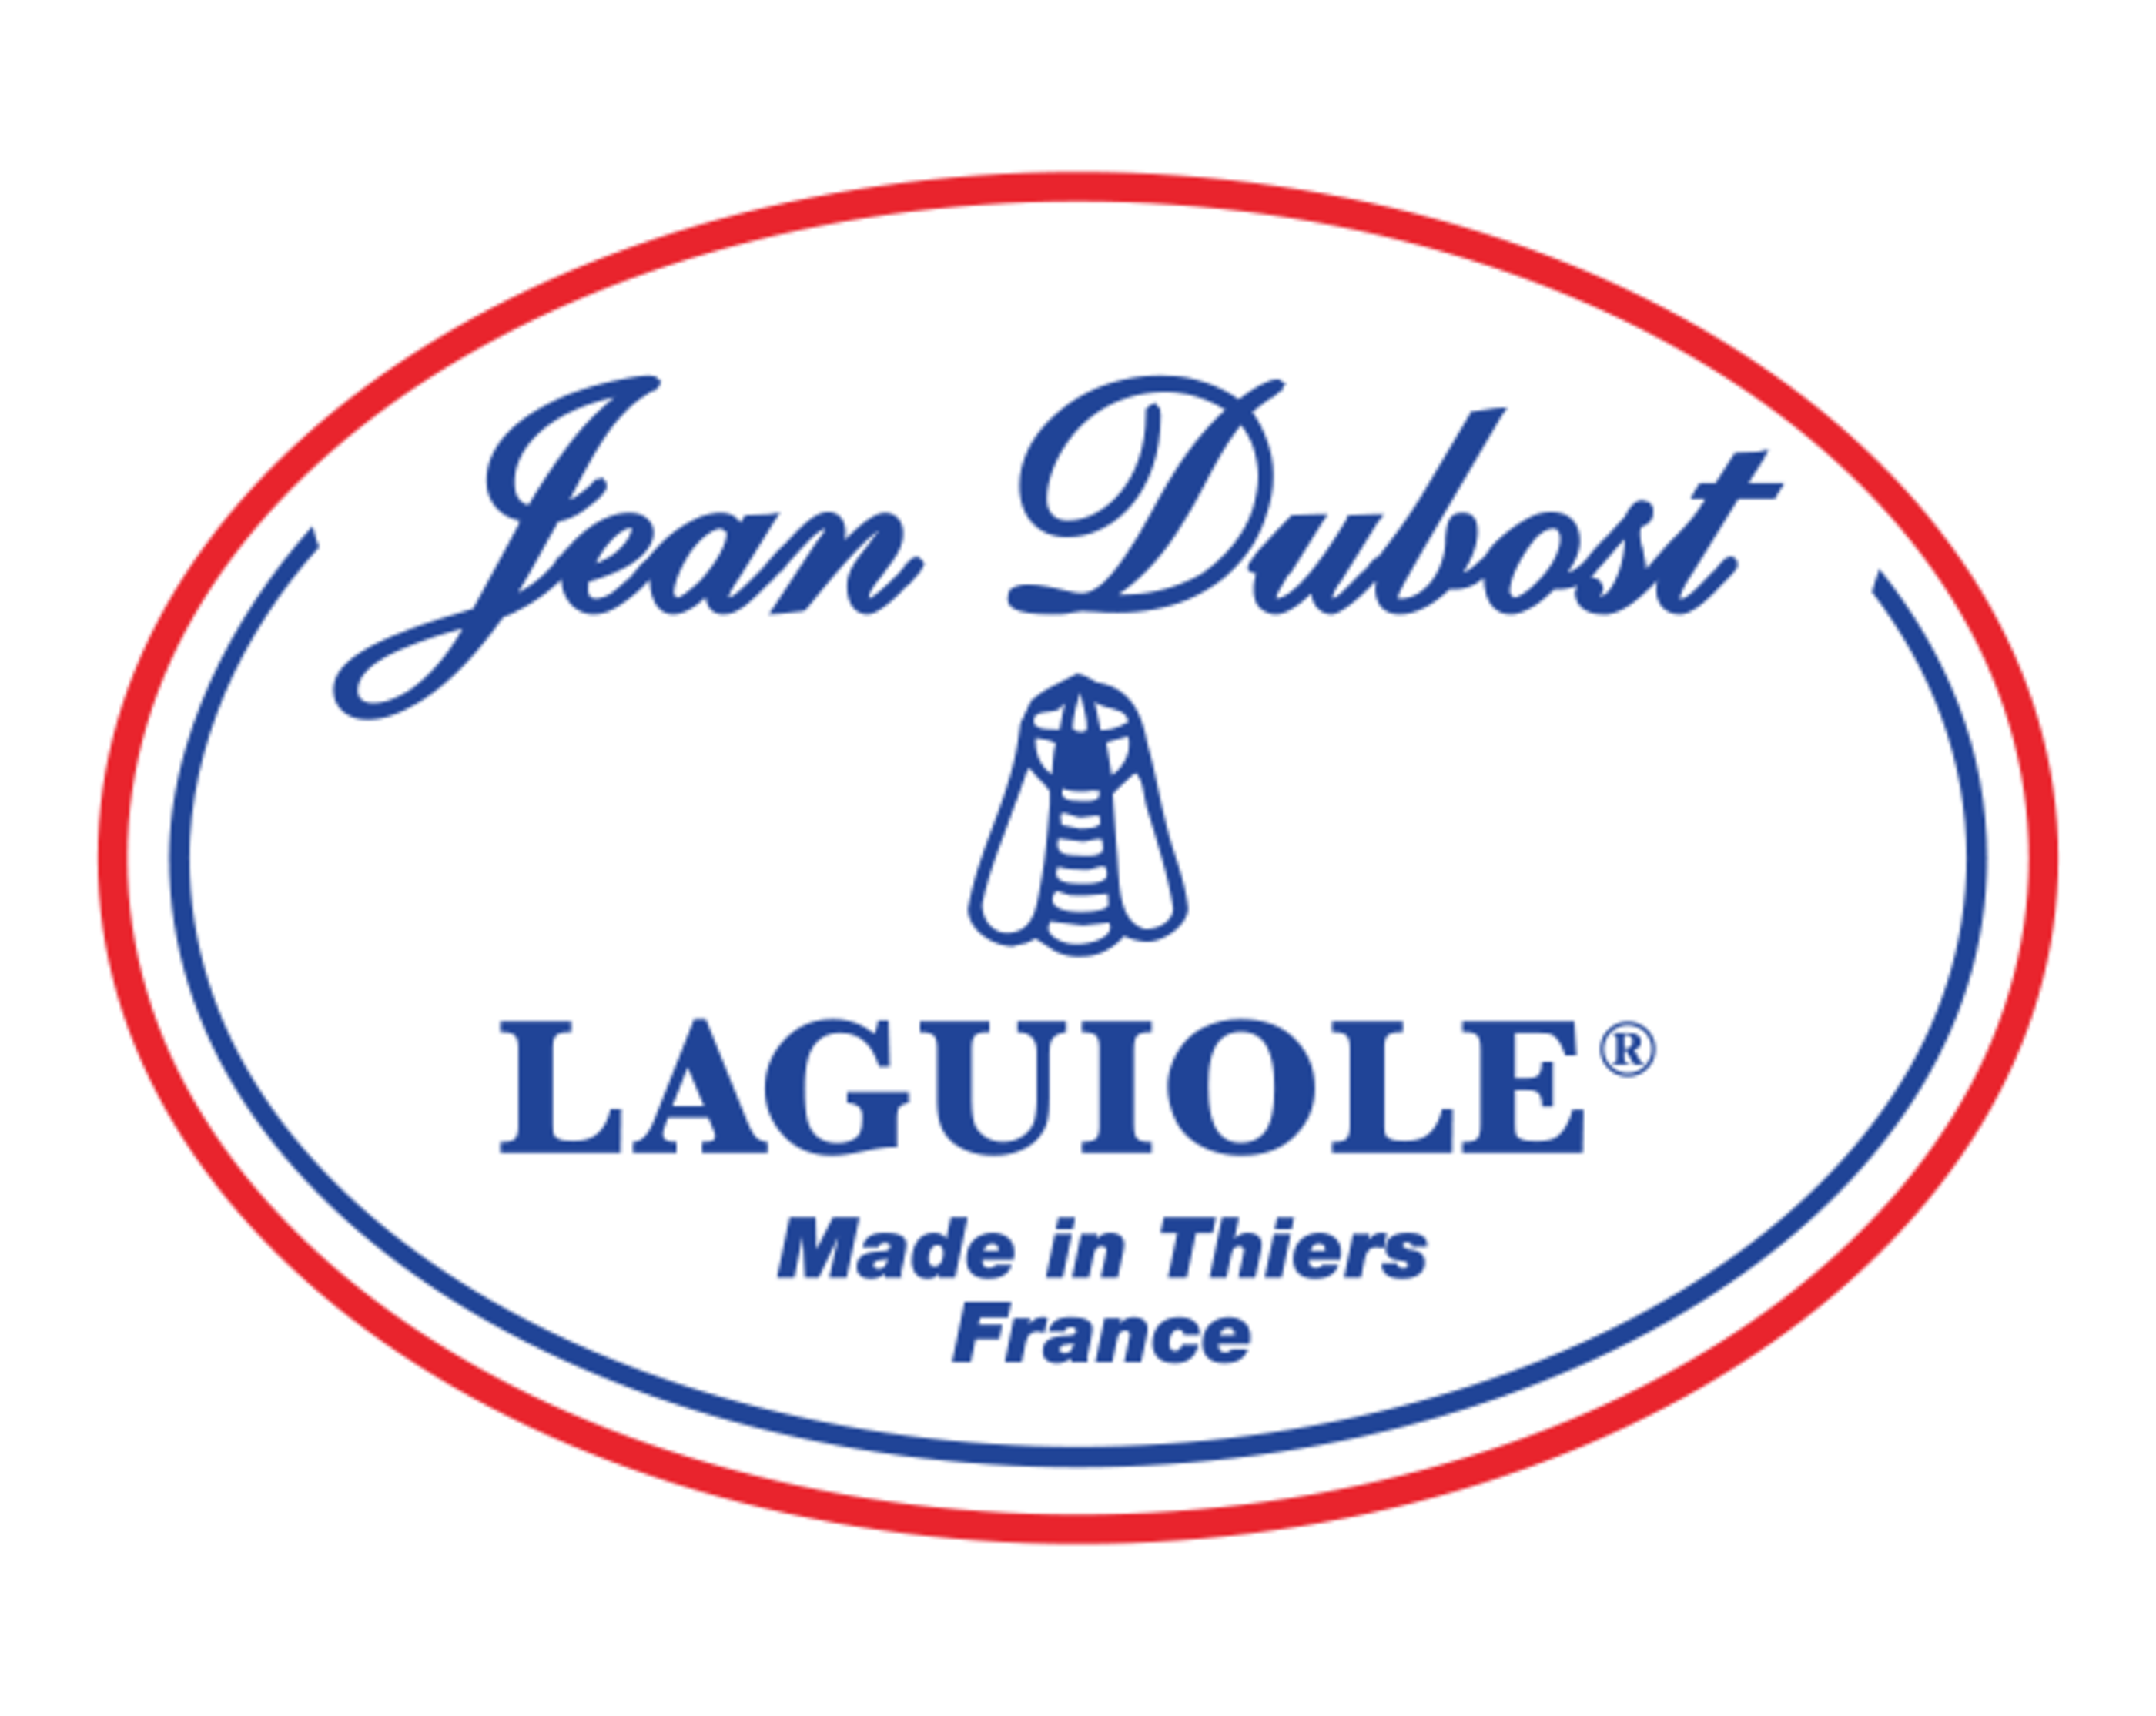 Jean_Dubost_Laguiole_Made_in_Thiers_France